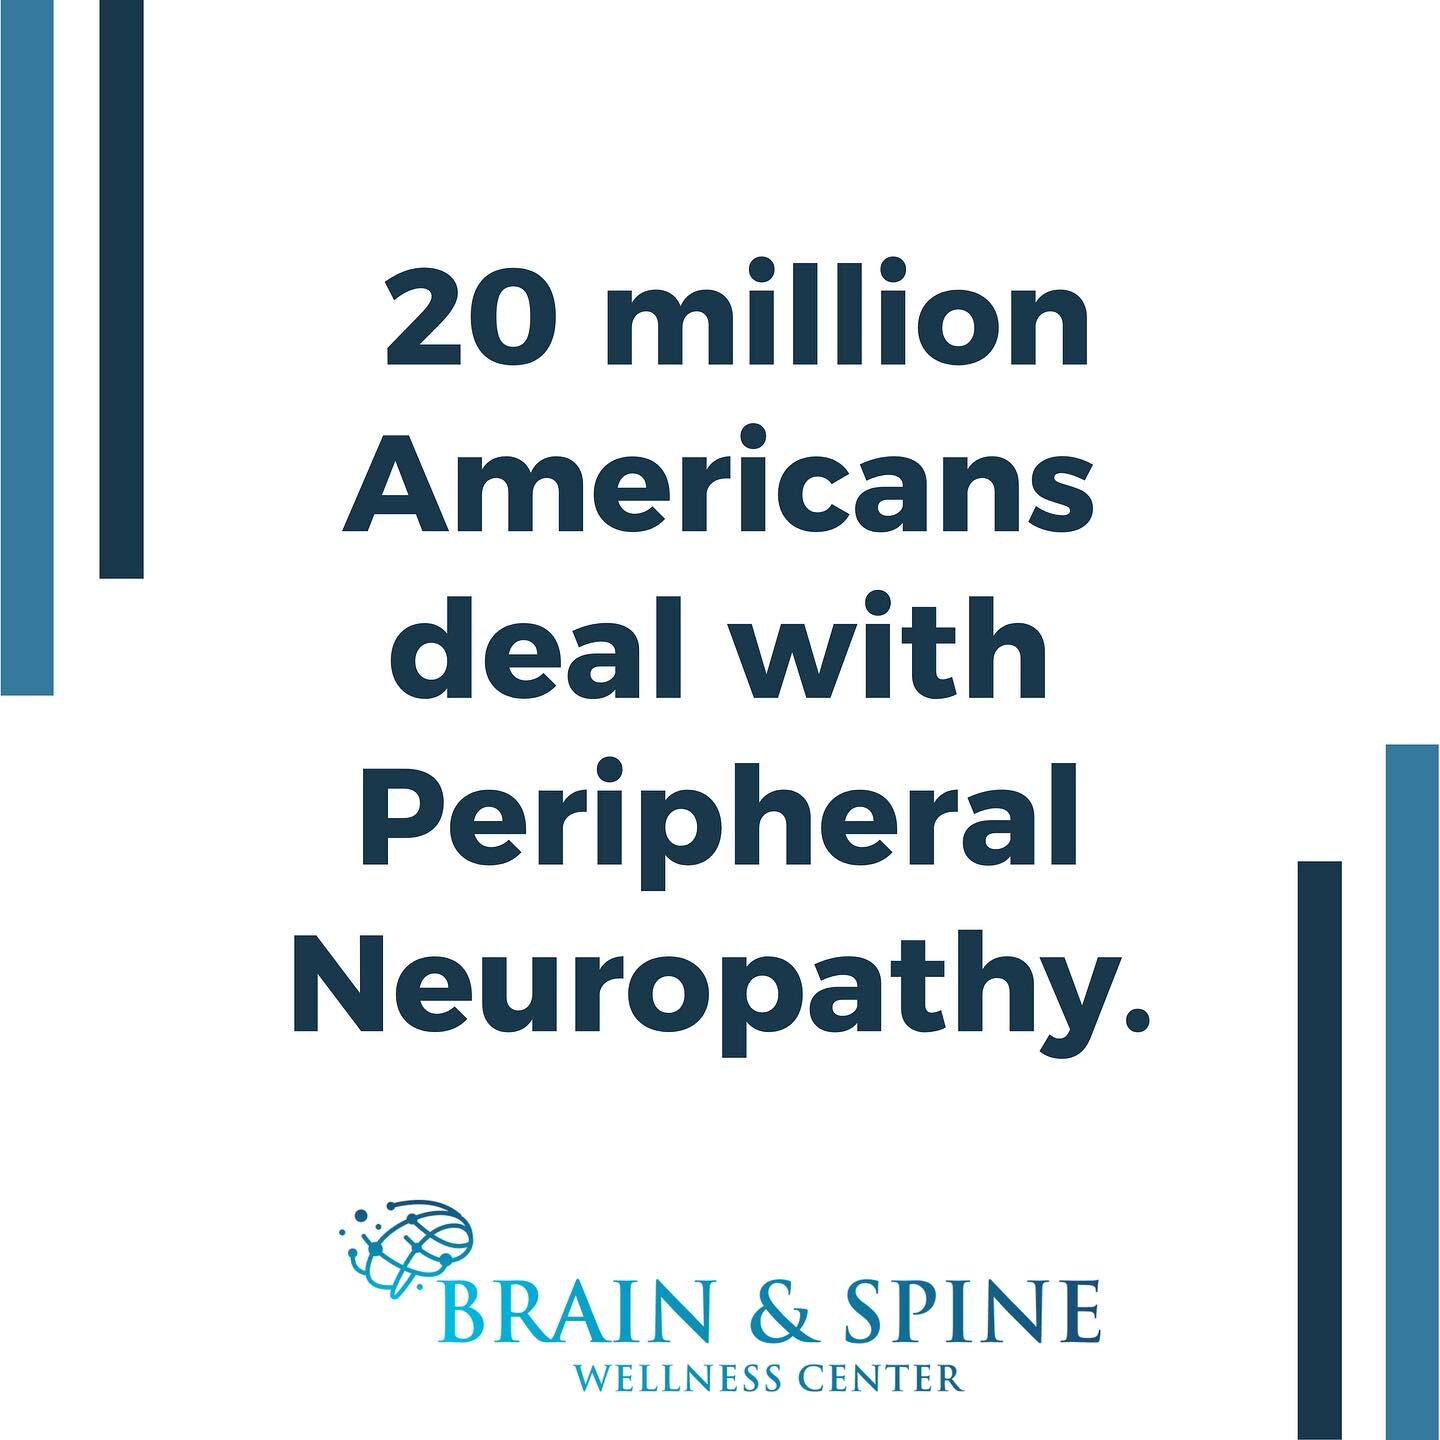 Symptoms of peripheral neuropathy can range from numbness or tingling to pricking sensations (paresthesia), or muscle weakness.&nbsp;Entire areas of the body may become extra sensitive leading to an exaggerated or distorted experience of touch (known